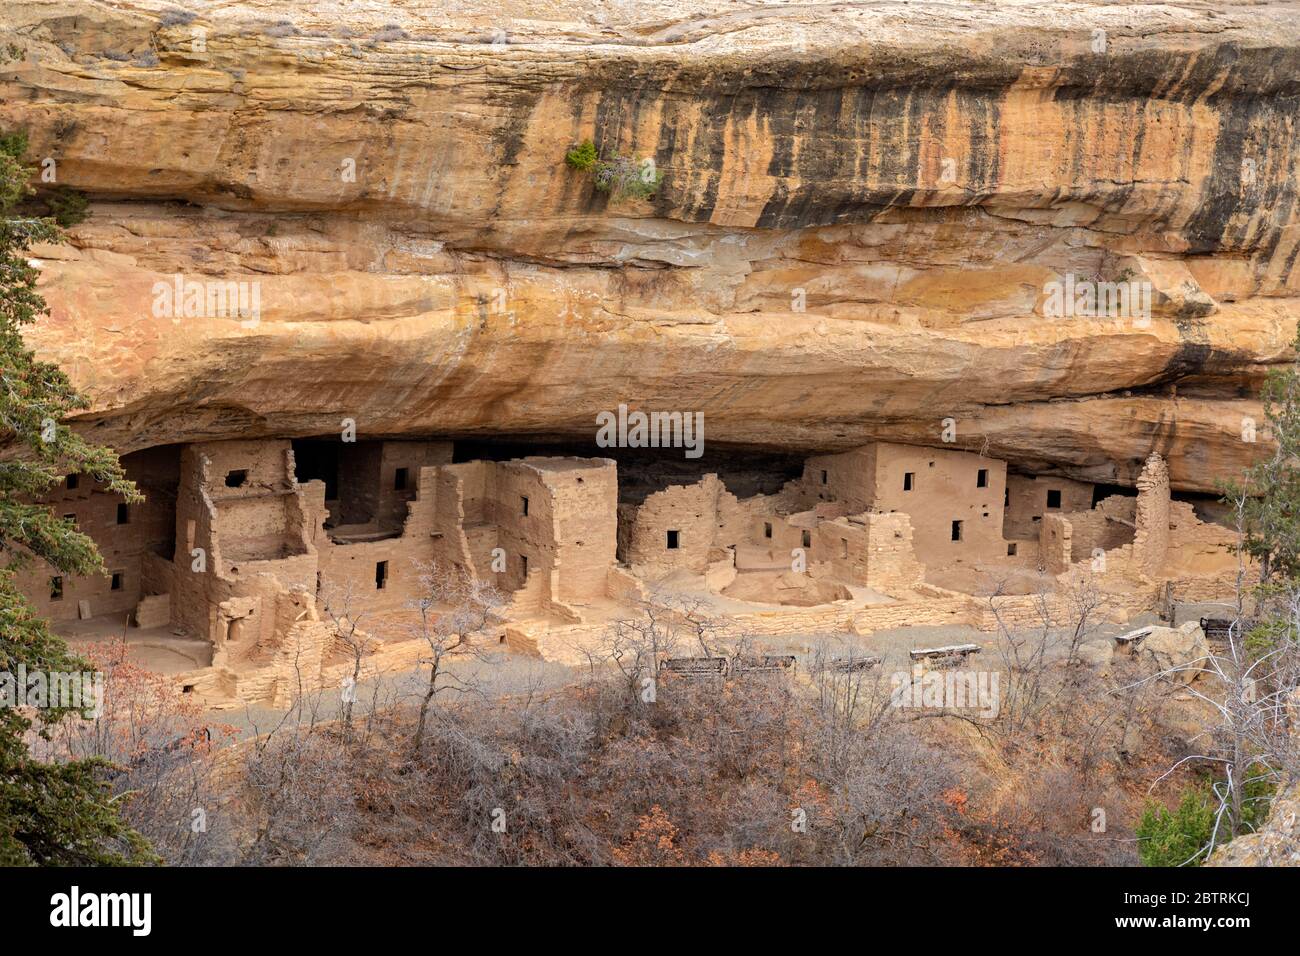 CO00268...COLORADO - Spruce Tree House built by the Ancestral Puebloans in a deep alcove over 700 years ago; now in Mesa Verde National Park. Stock Photo